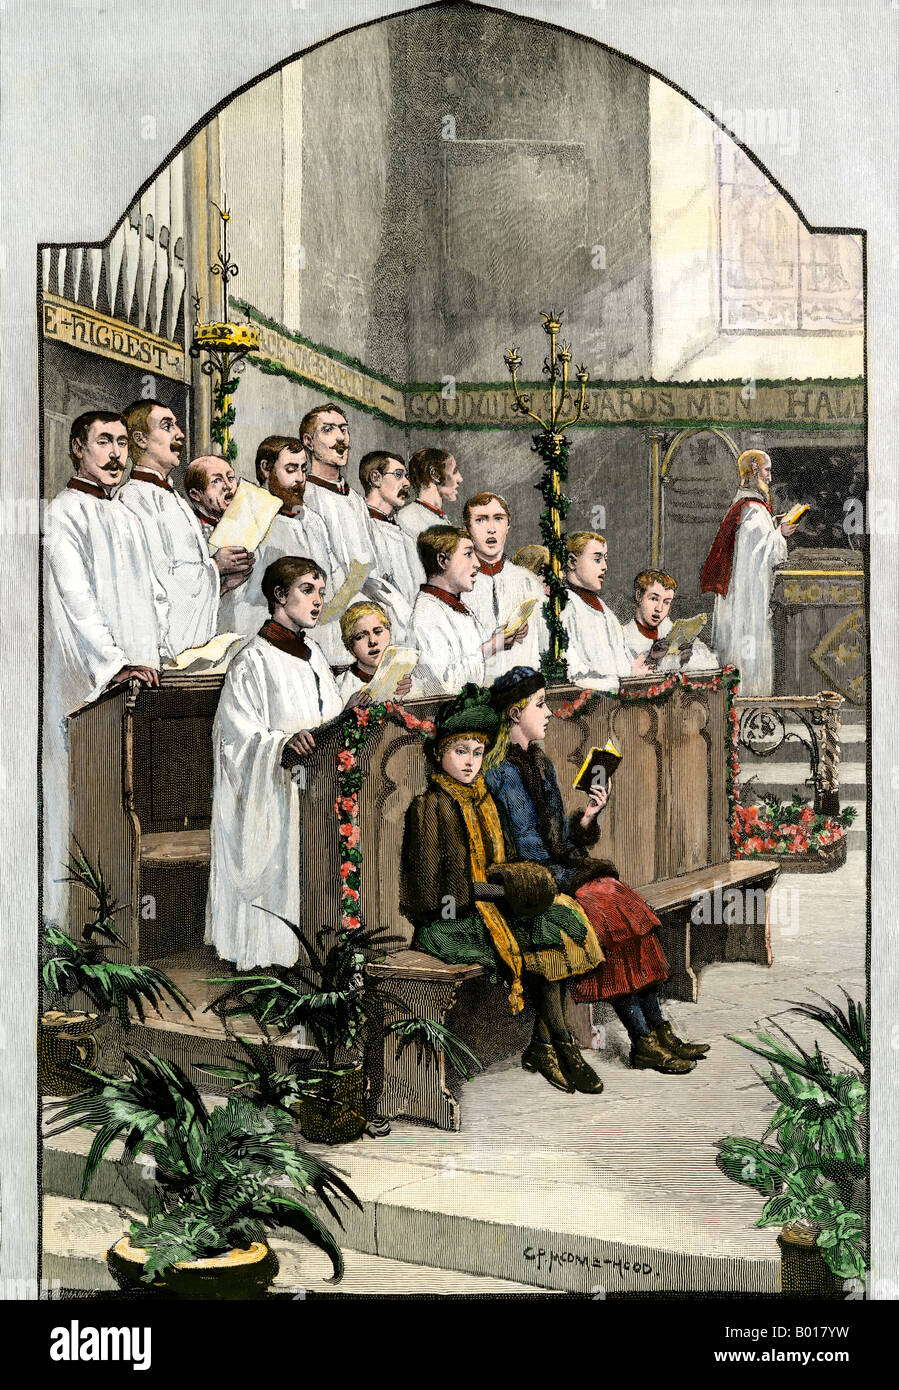 Choir singing a Christmas hymn in an Anglican church 1880s. Hand-colored woodcut Stock Photo